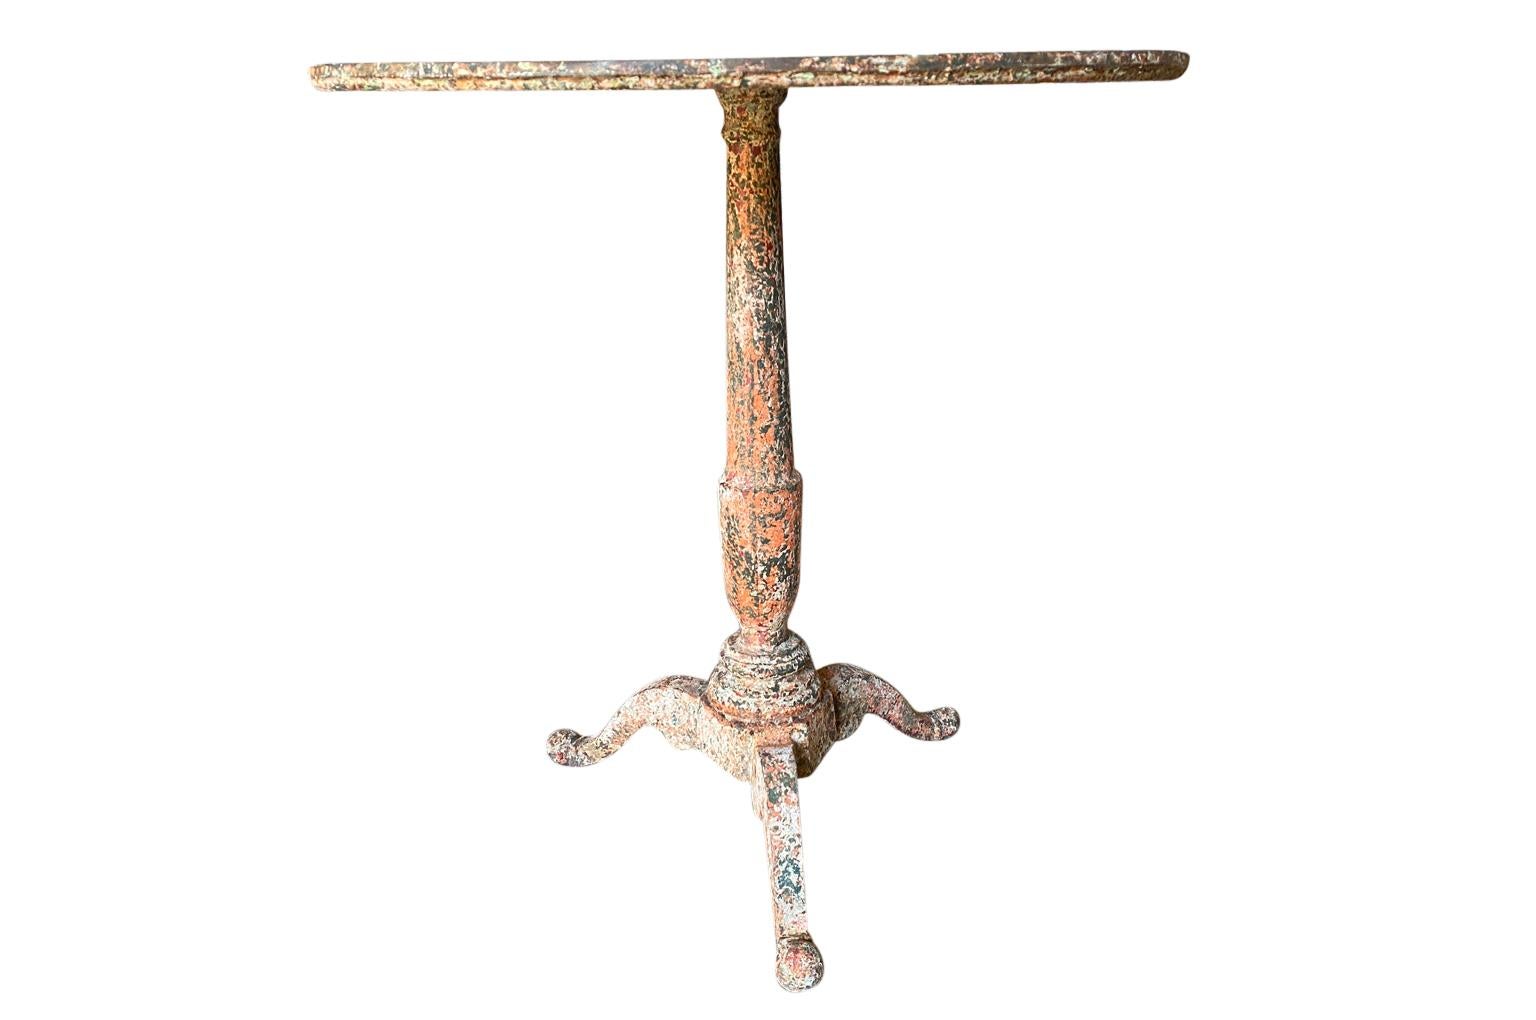 Late 19th century garden gueridon from the Provence region of France. Soundly crafted from weighty cast iron with a fabulous painted finish. Great patina. Perfect for any interior of garden.